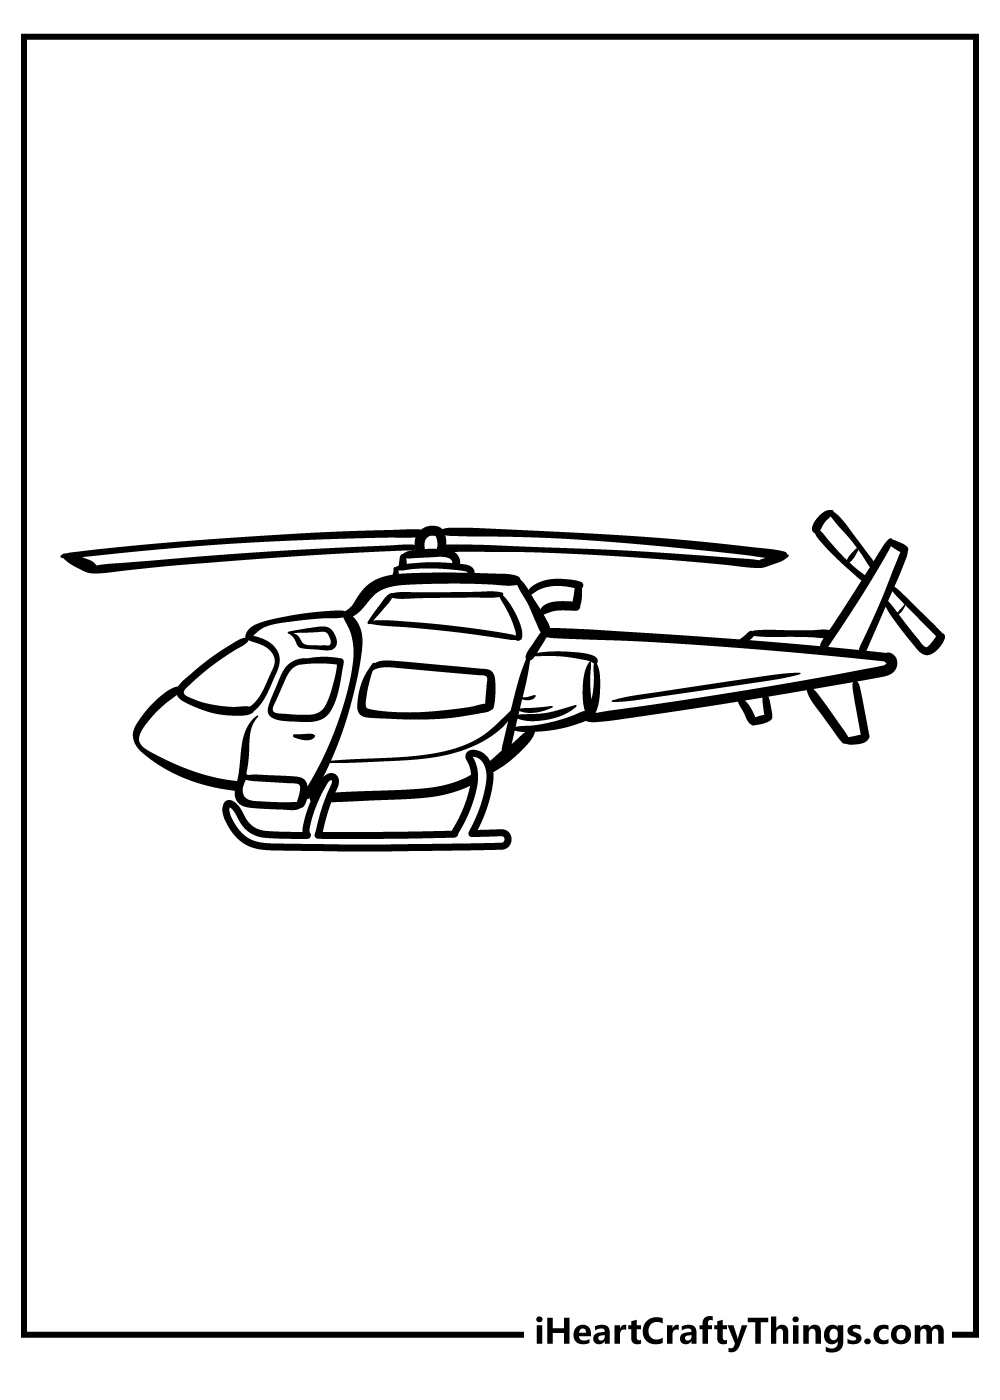 Helicopter Coloring Pages for kids free download